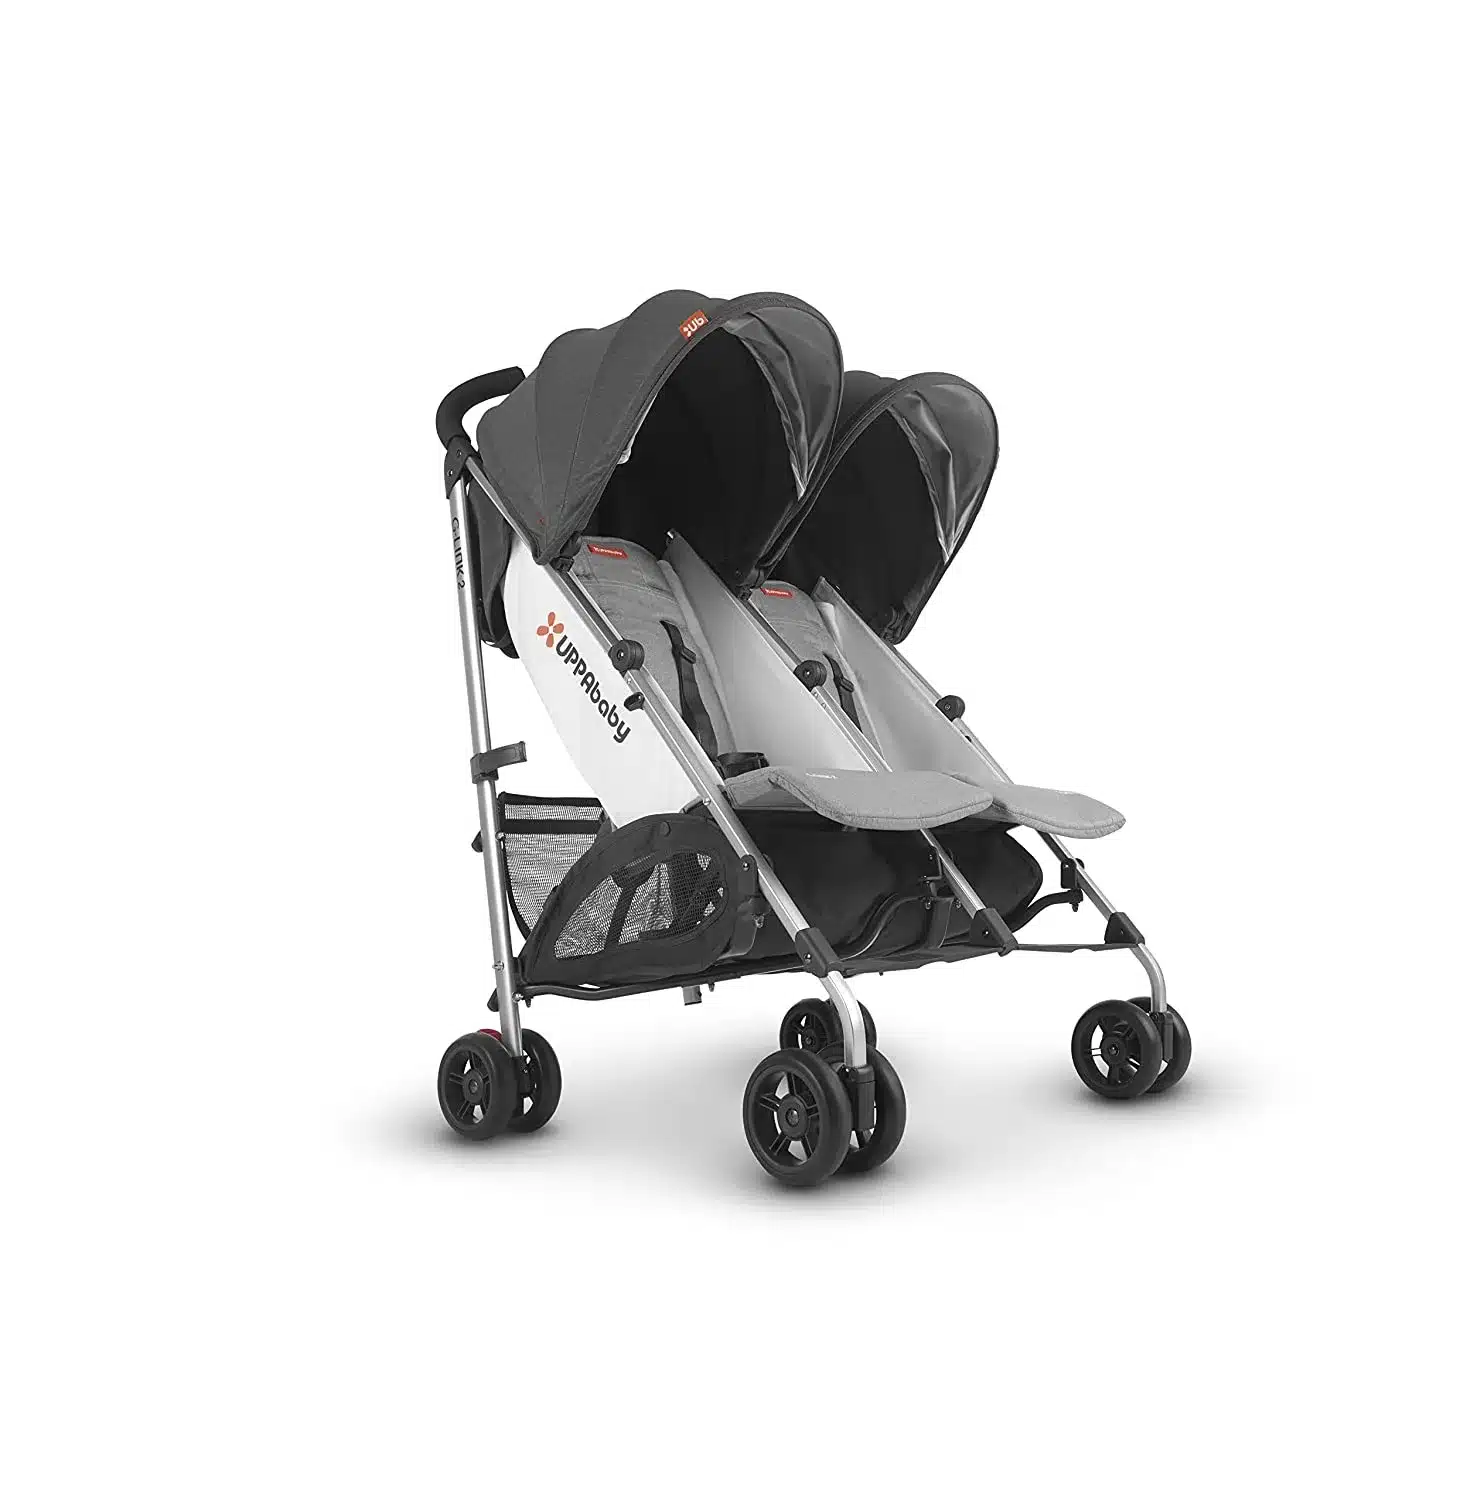 UPPAbaby double stroller for Disney World